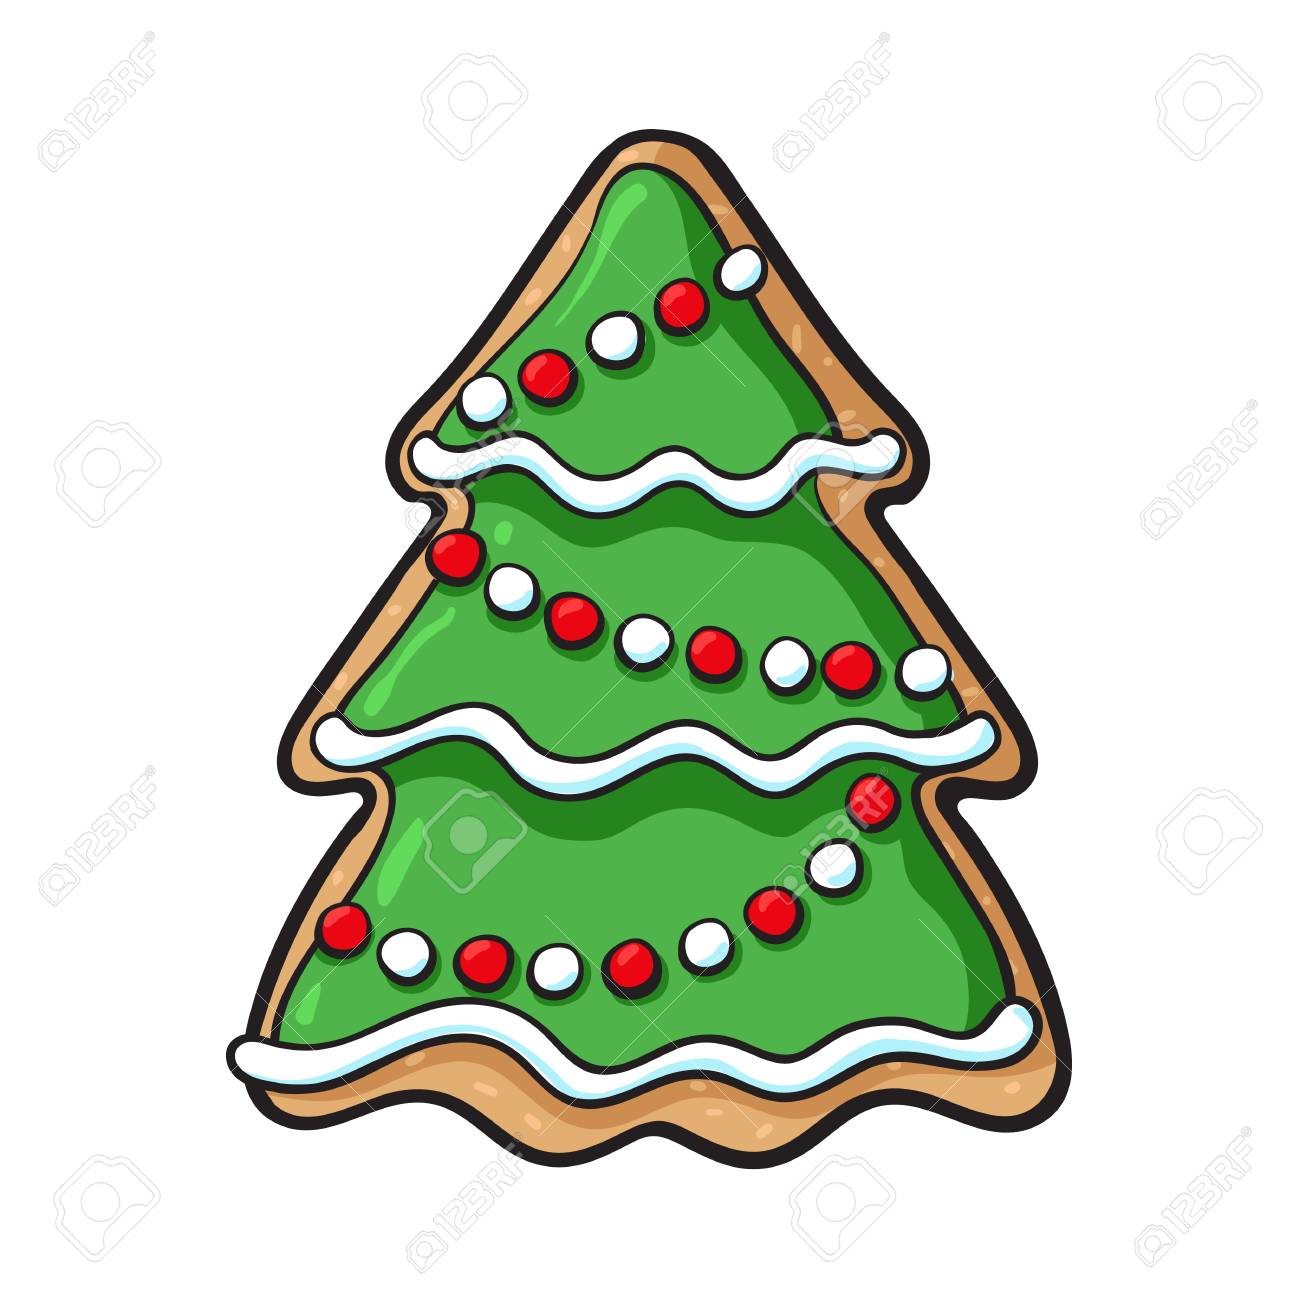 Glazed homemade Christmas tree gingerbread cookie, sketch style...